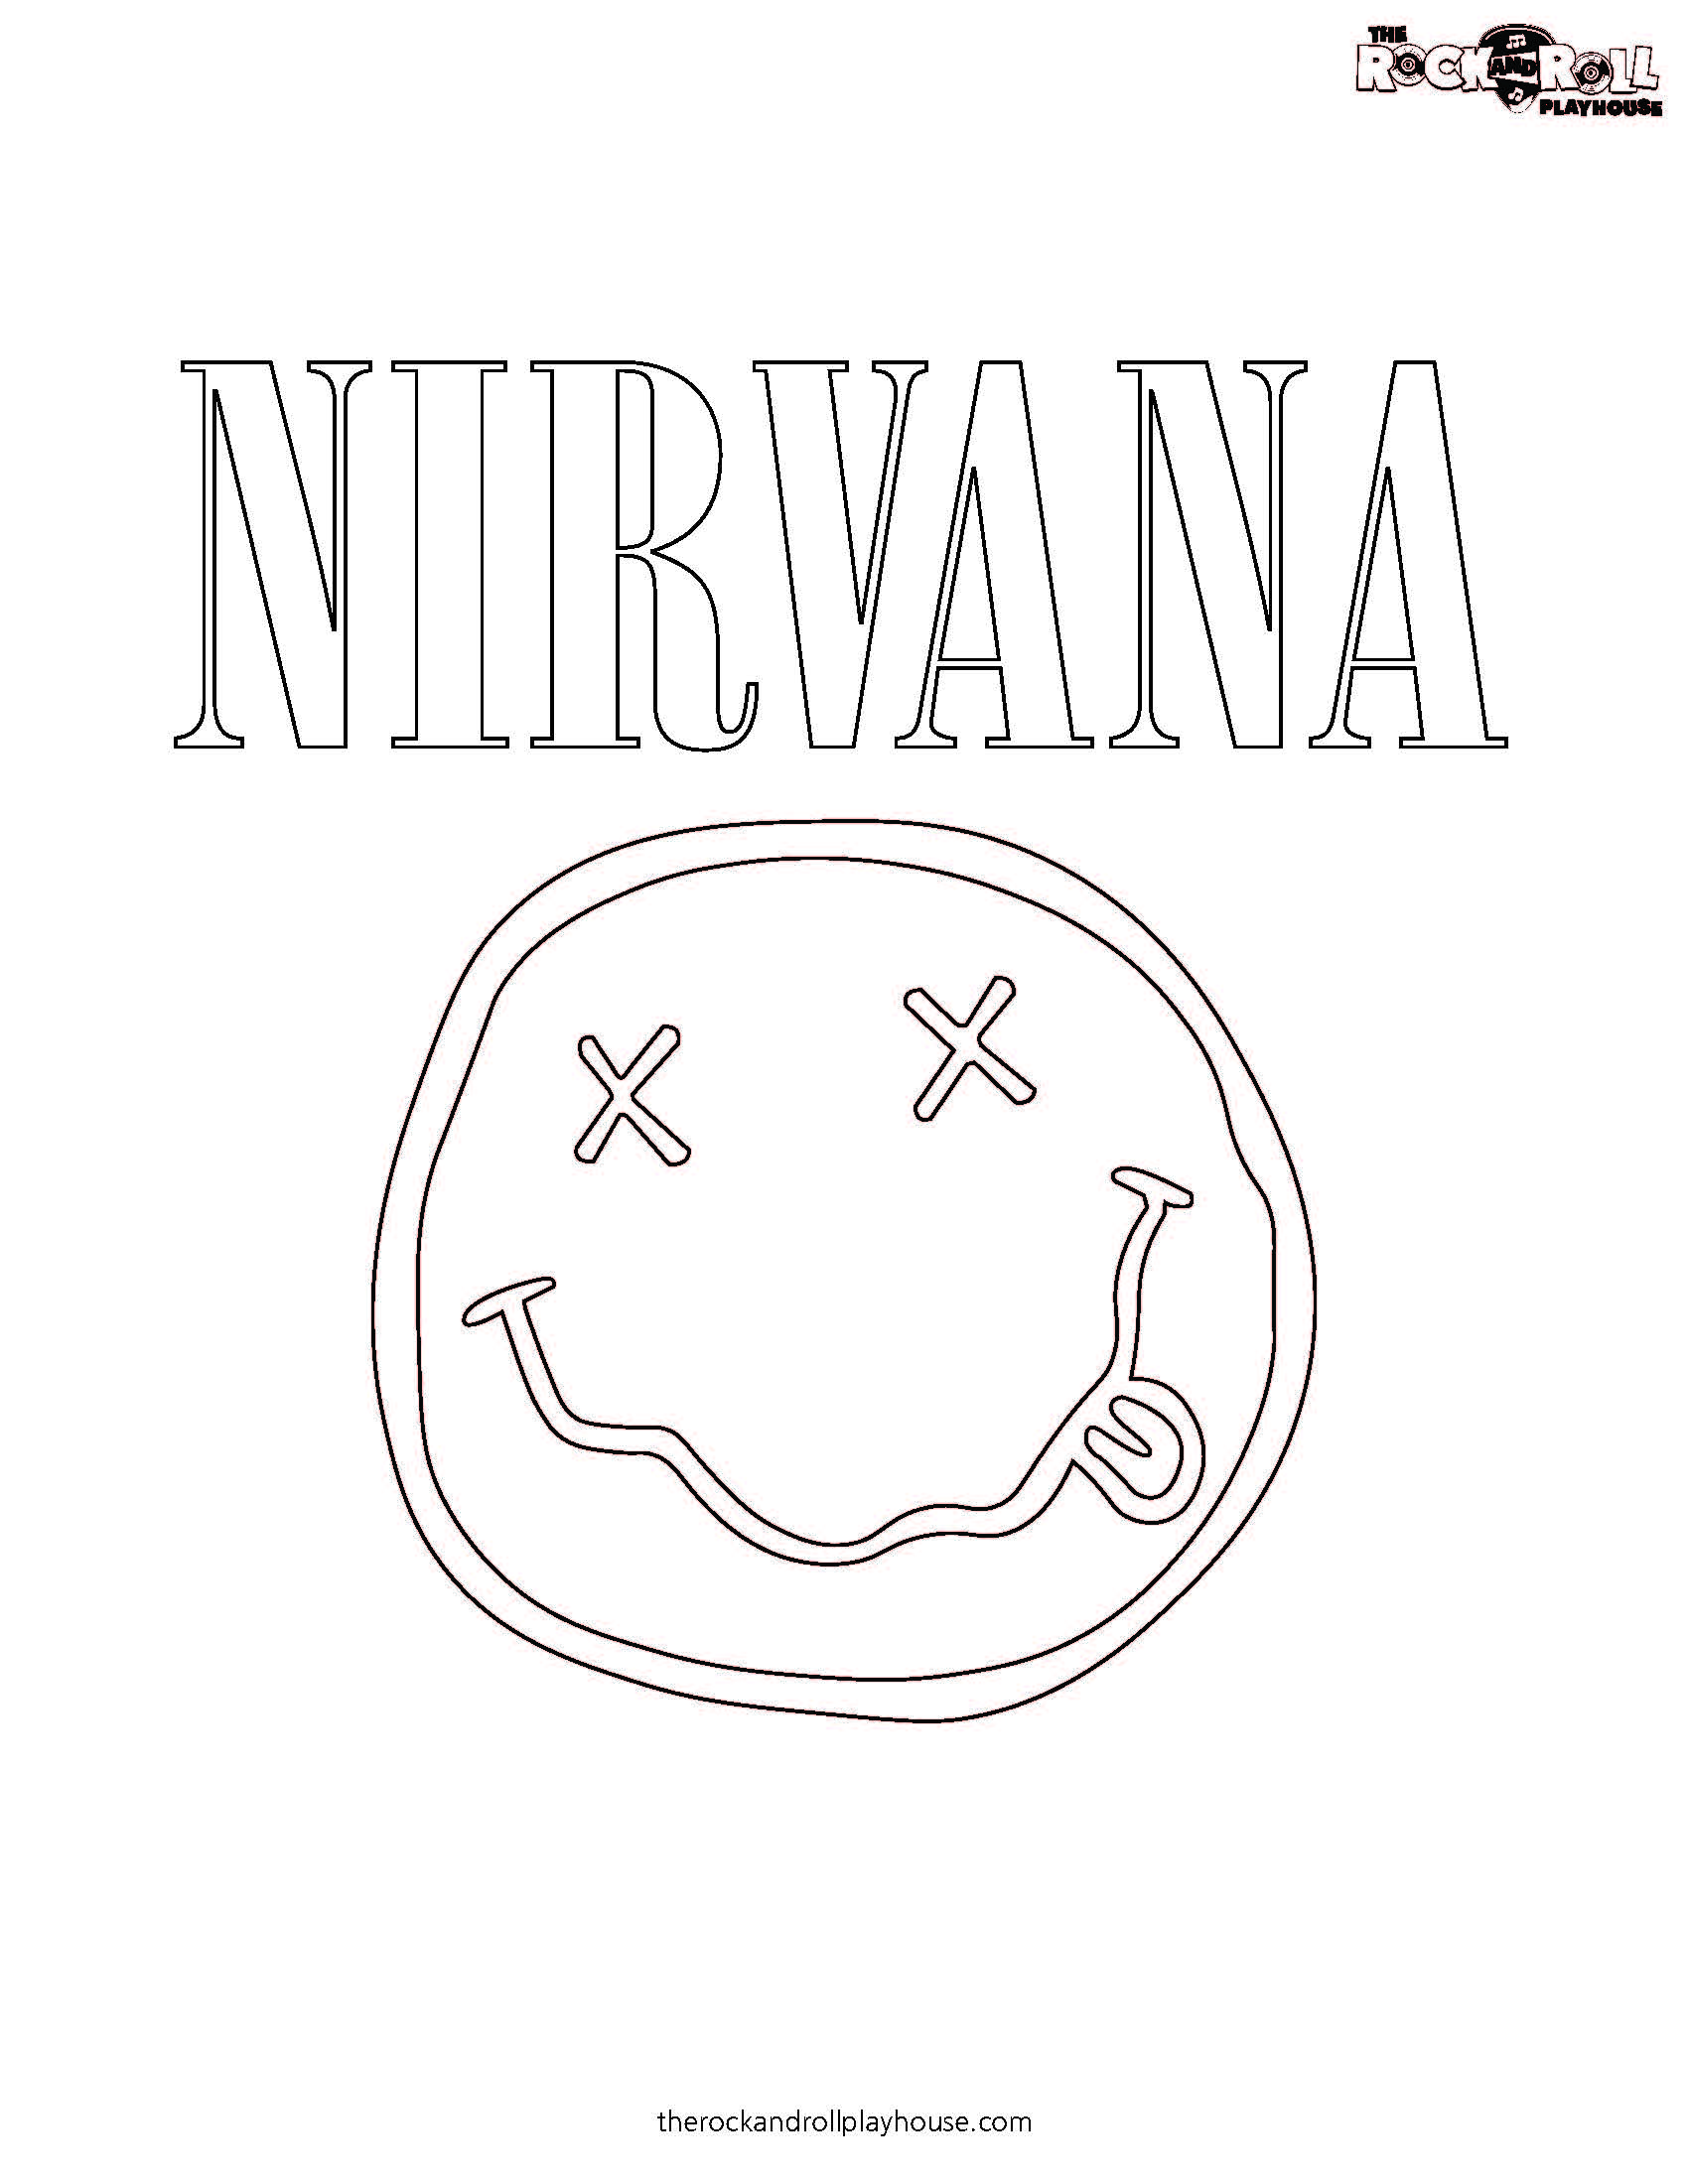 Nirvana Coloring | The Rock and Roll Playhouse